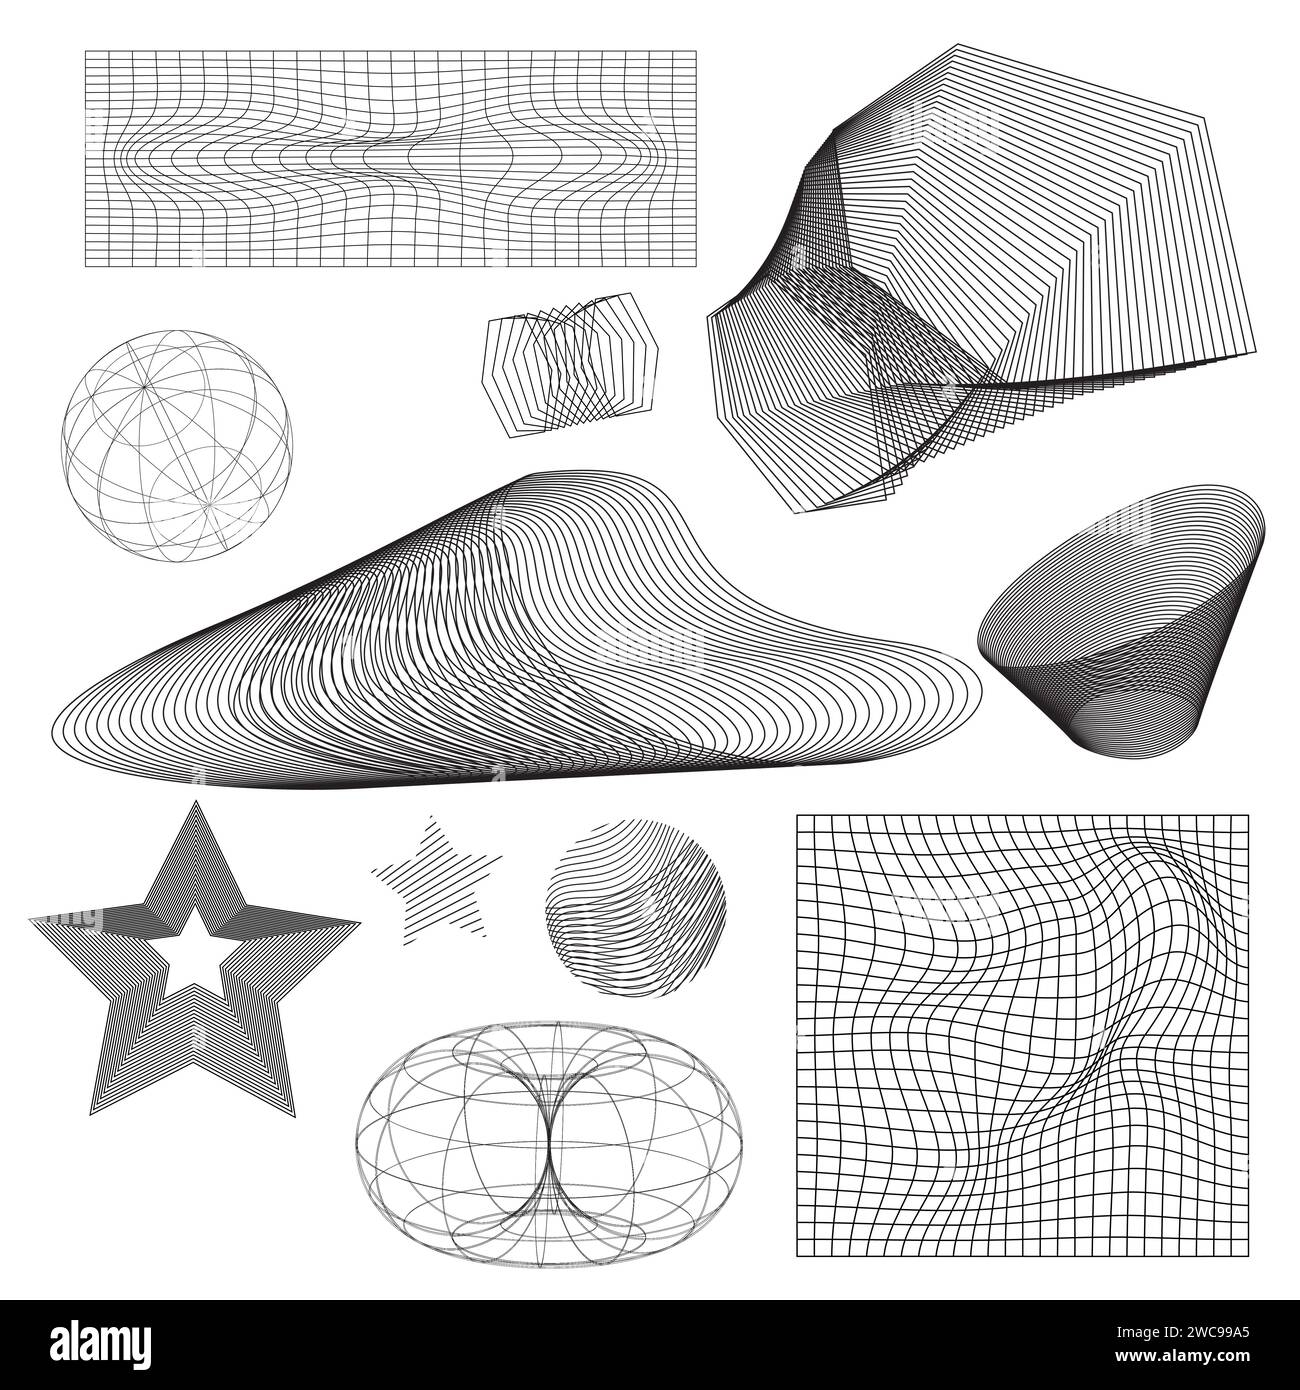 Abstract wireframe figure drawings set isolated on white background. Vector illustration of 3D grid symbols, y2k mesh globe, star, cone, torus, landsc Stock Vector